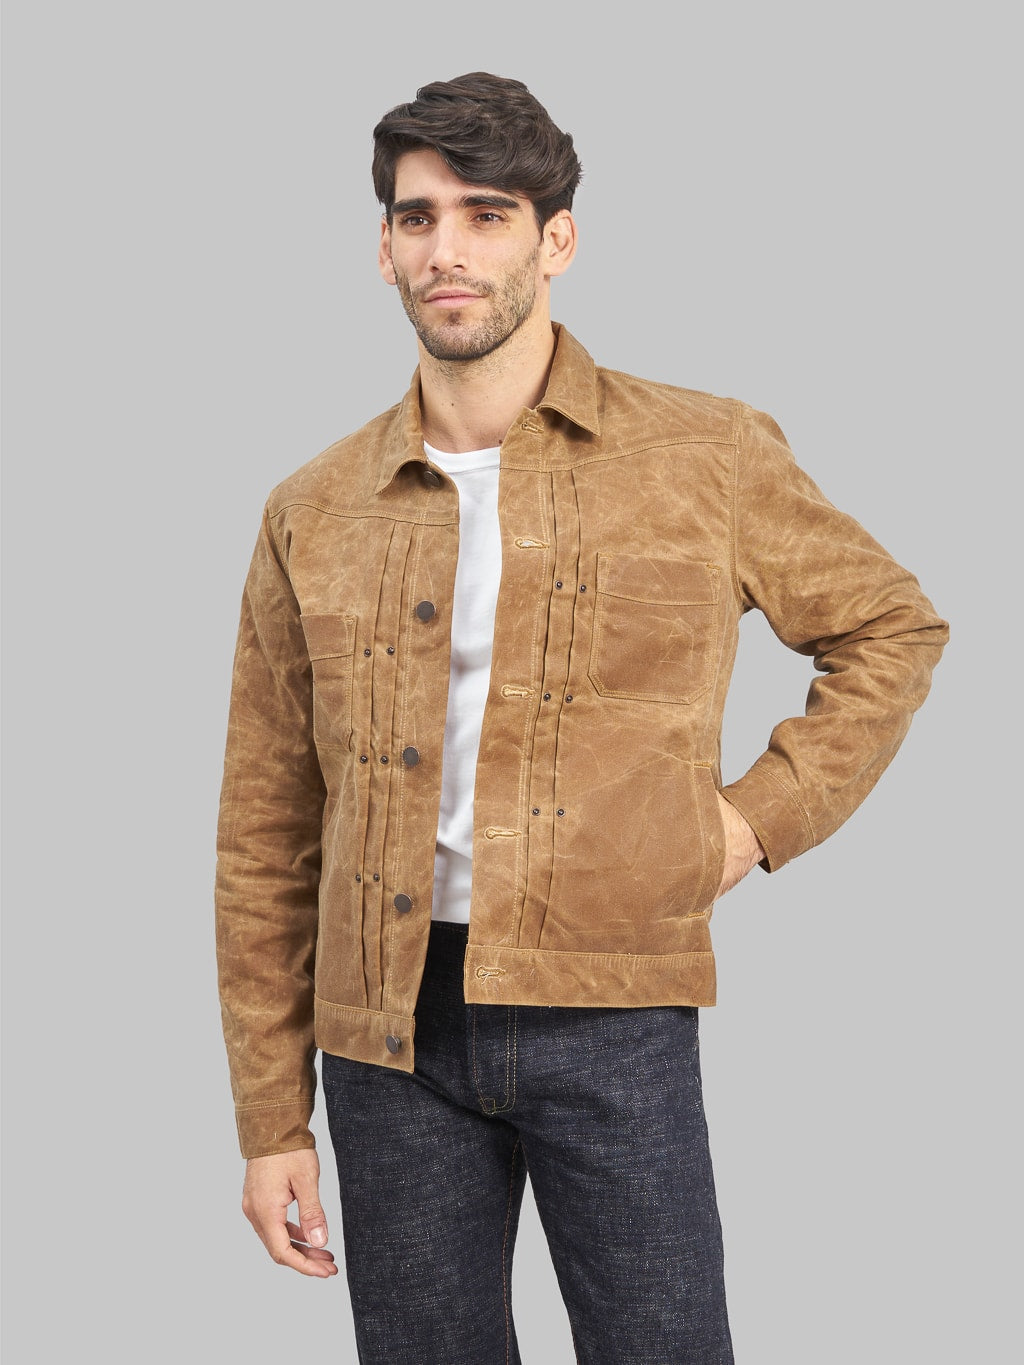 Freenote Cloth Riders Jacket Waxed Canvas Rust style